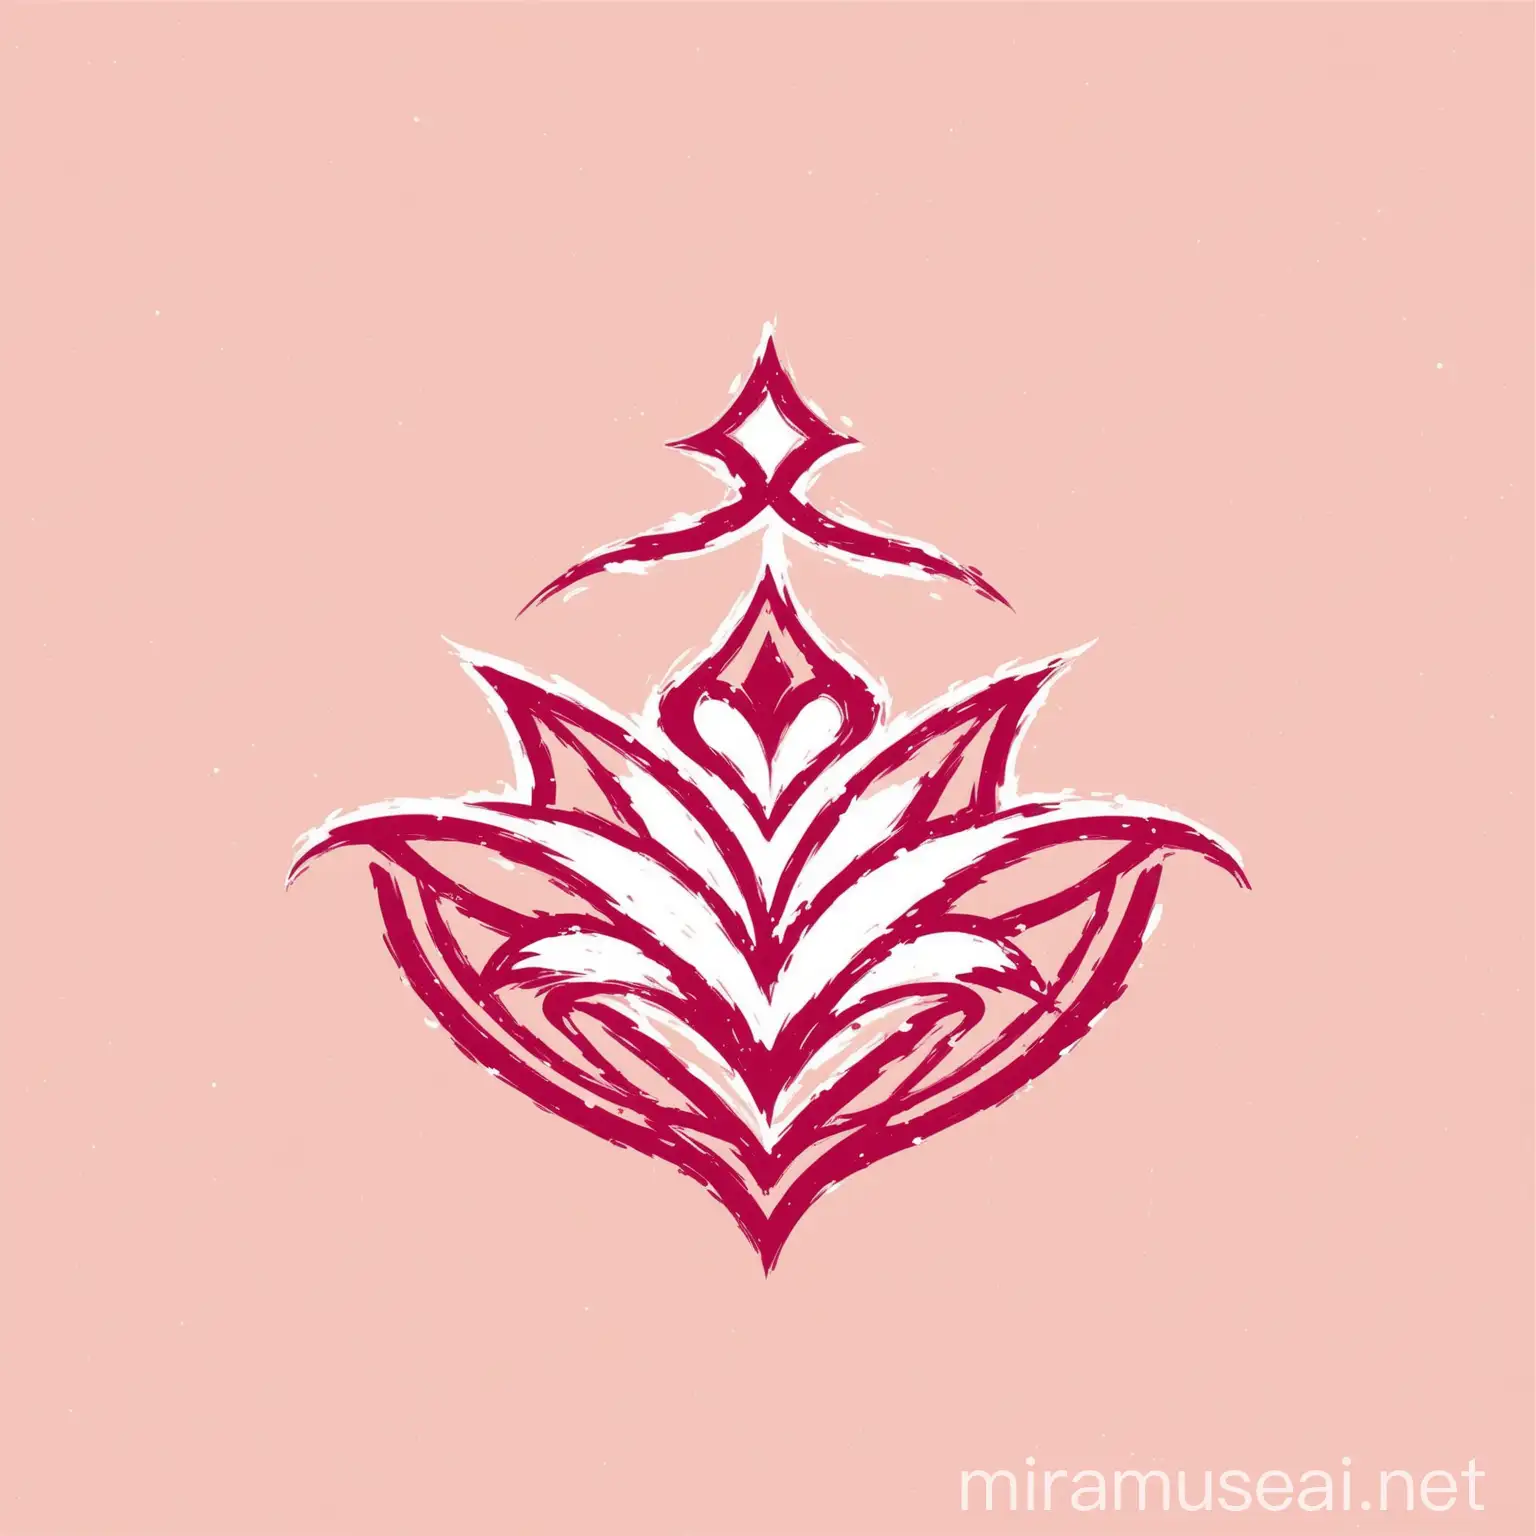 Make a brand logo that matches this name: ROZANA. The main colors would be red, pink and white. It is a luxury brand so the logo have to be elegant